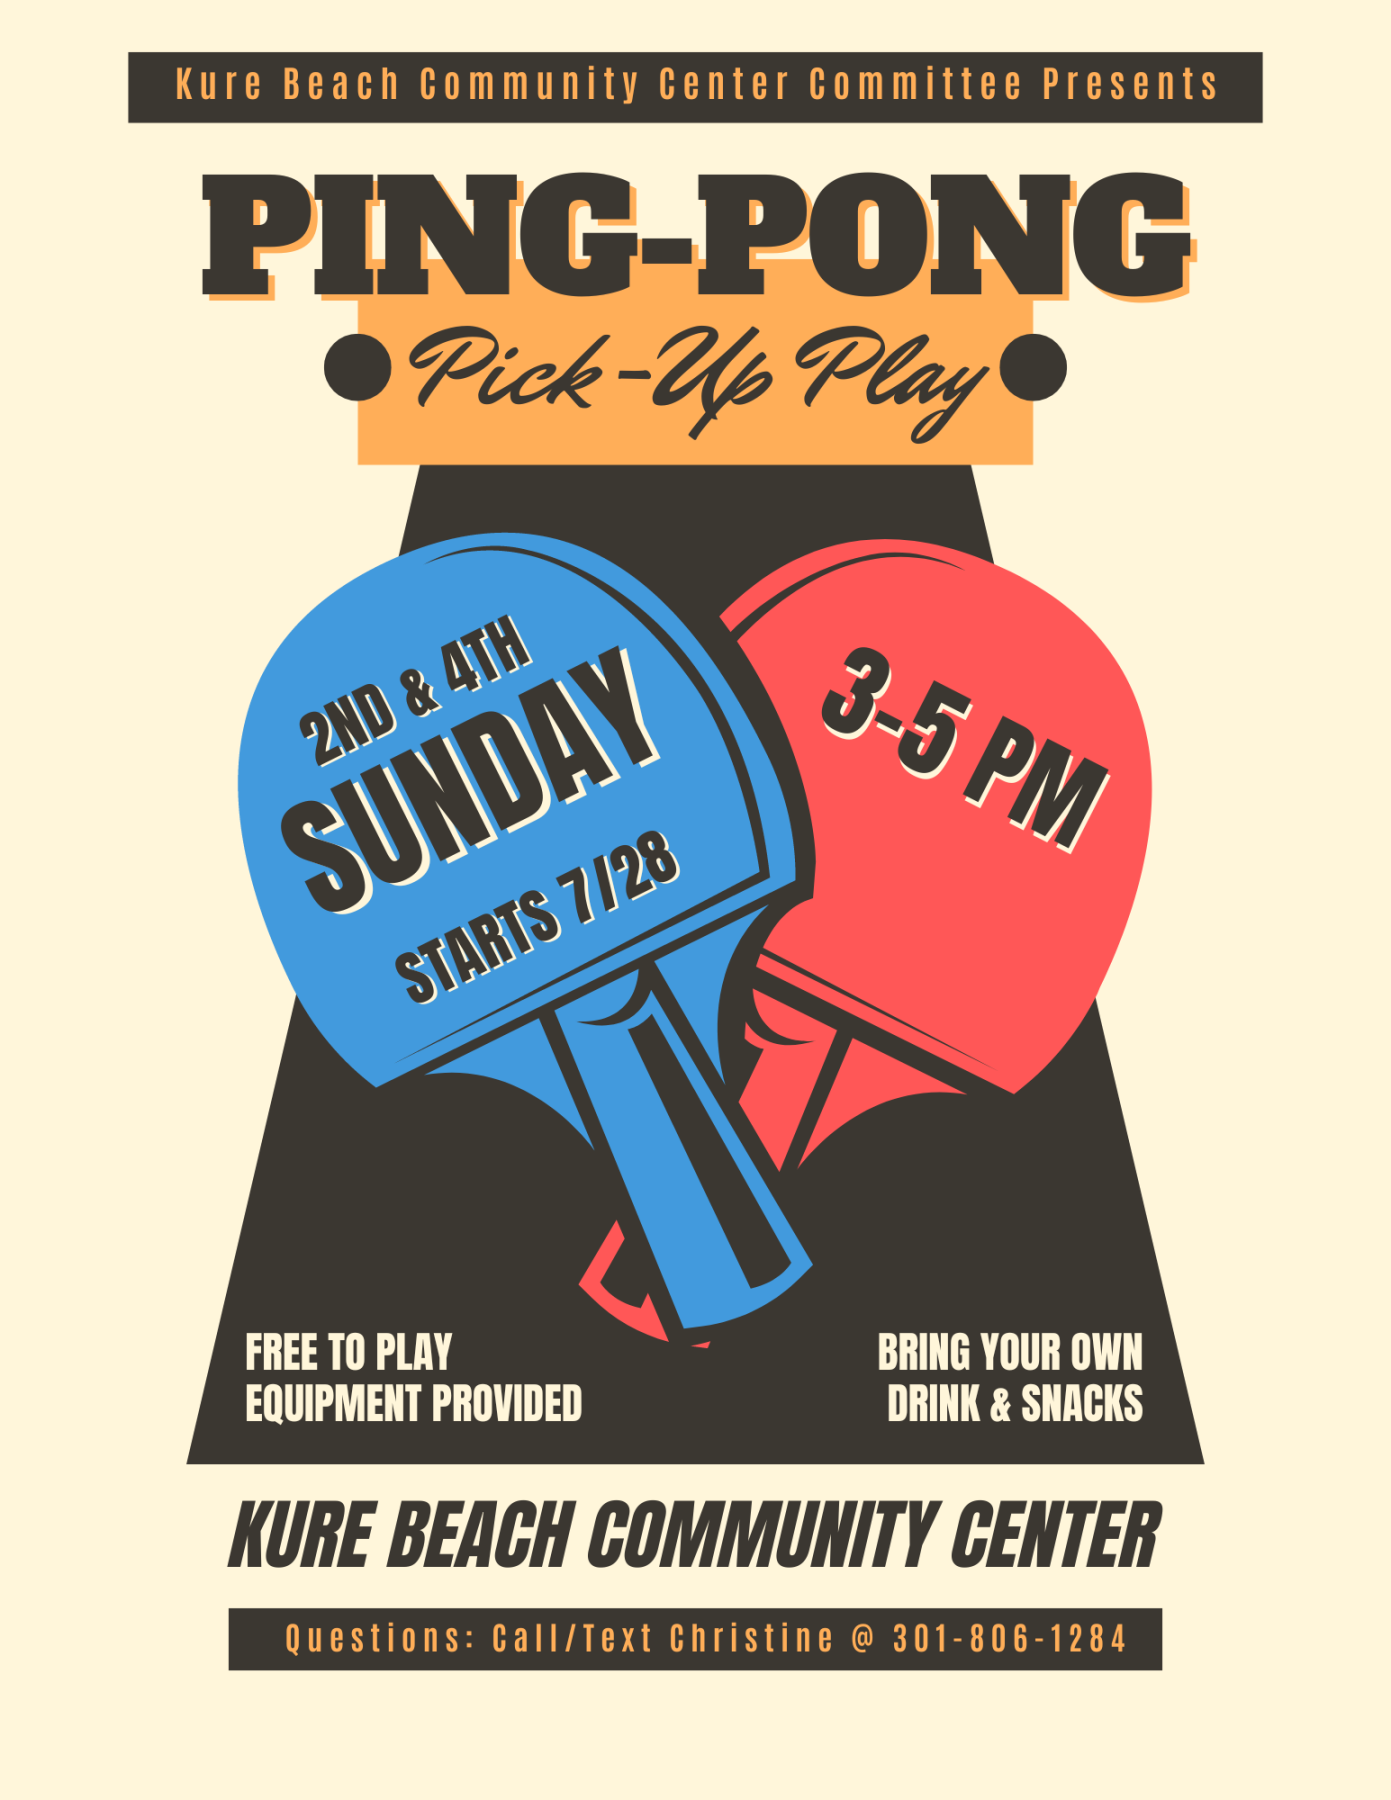 Pick Up Ping Pong Details